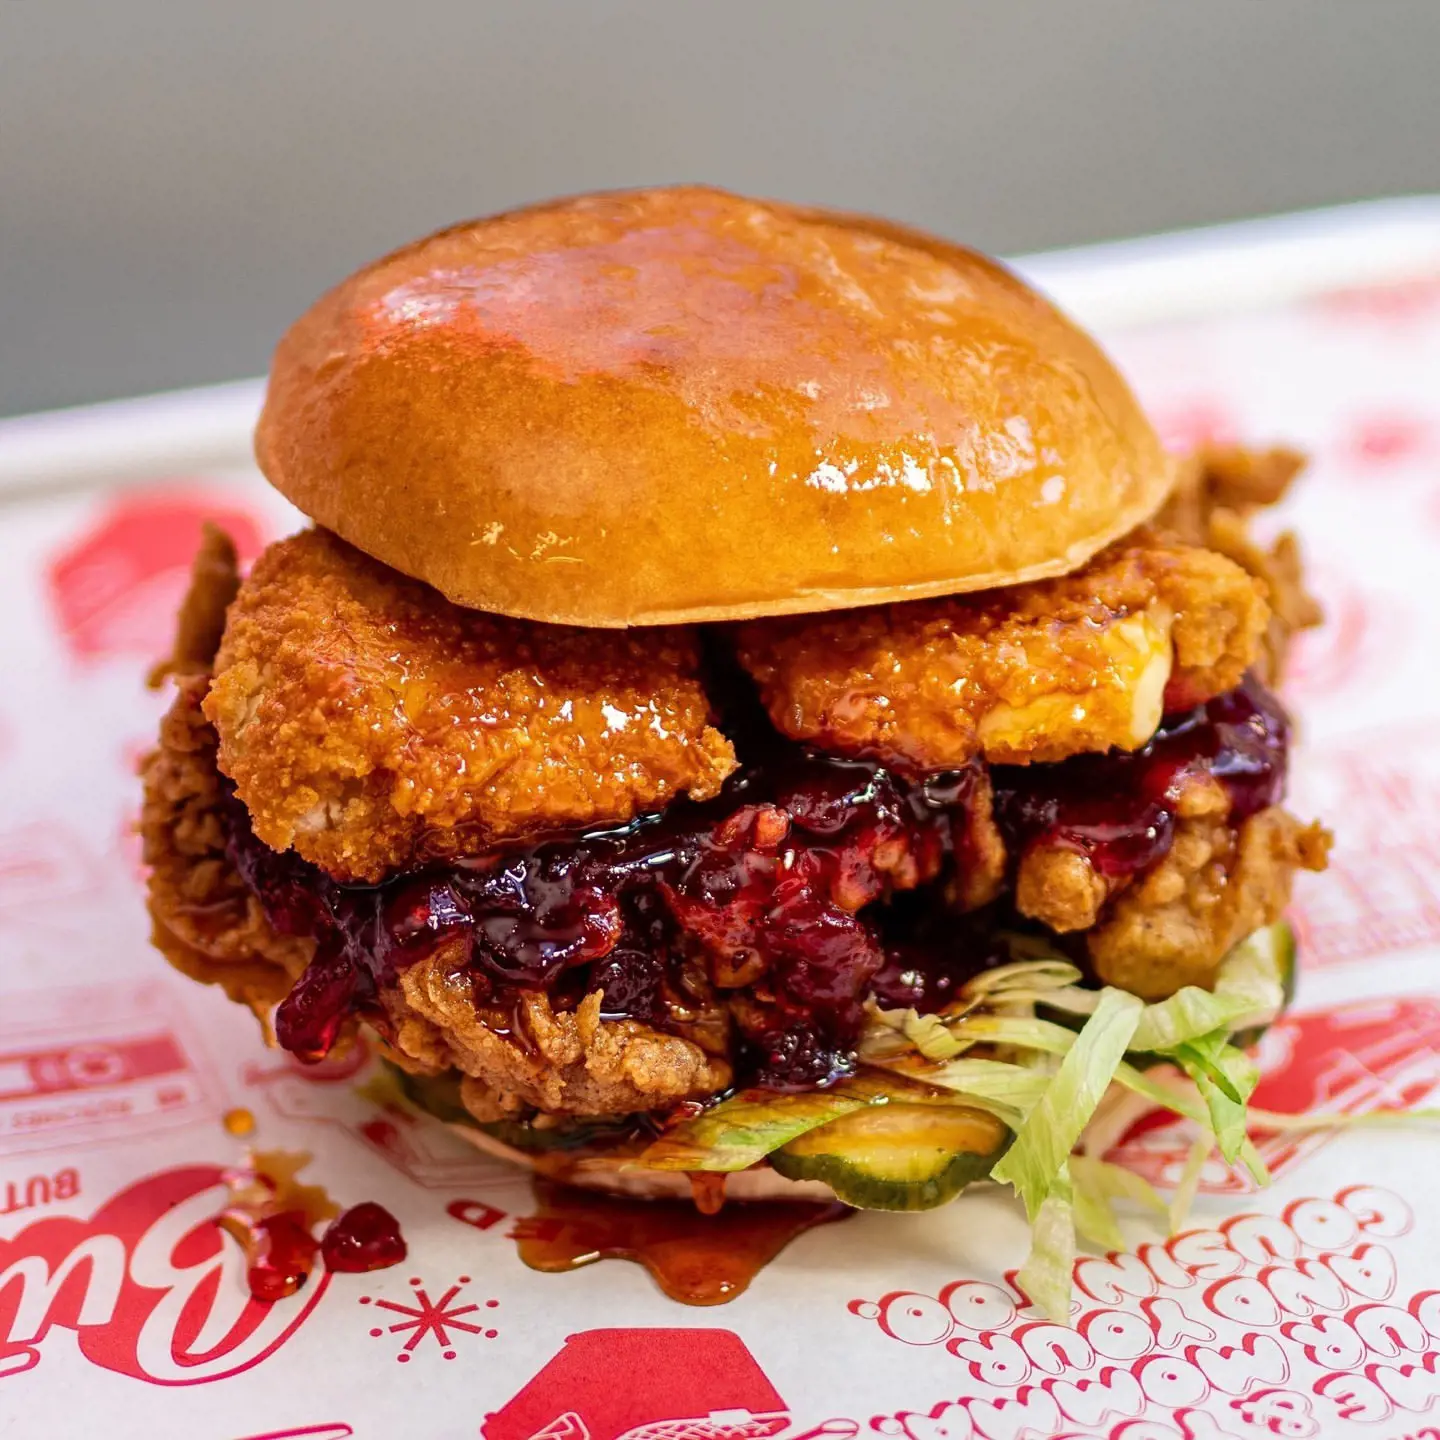 Decadent burger of buttermilk fried chicken with melted brie and cranberry